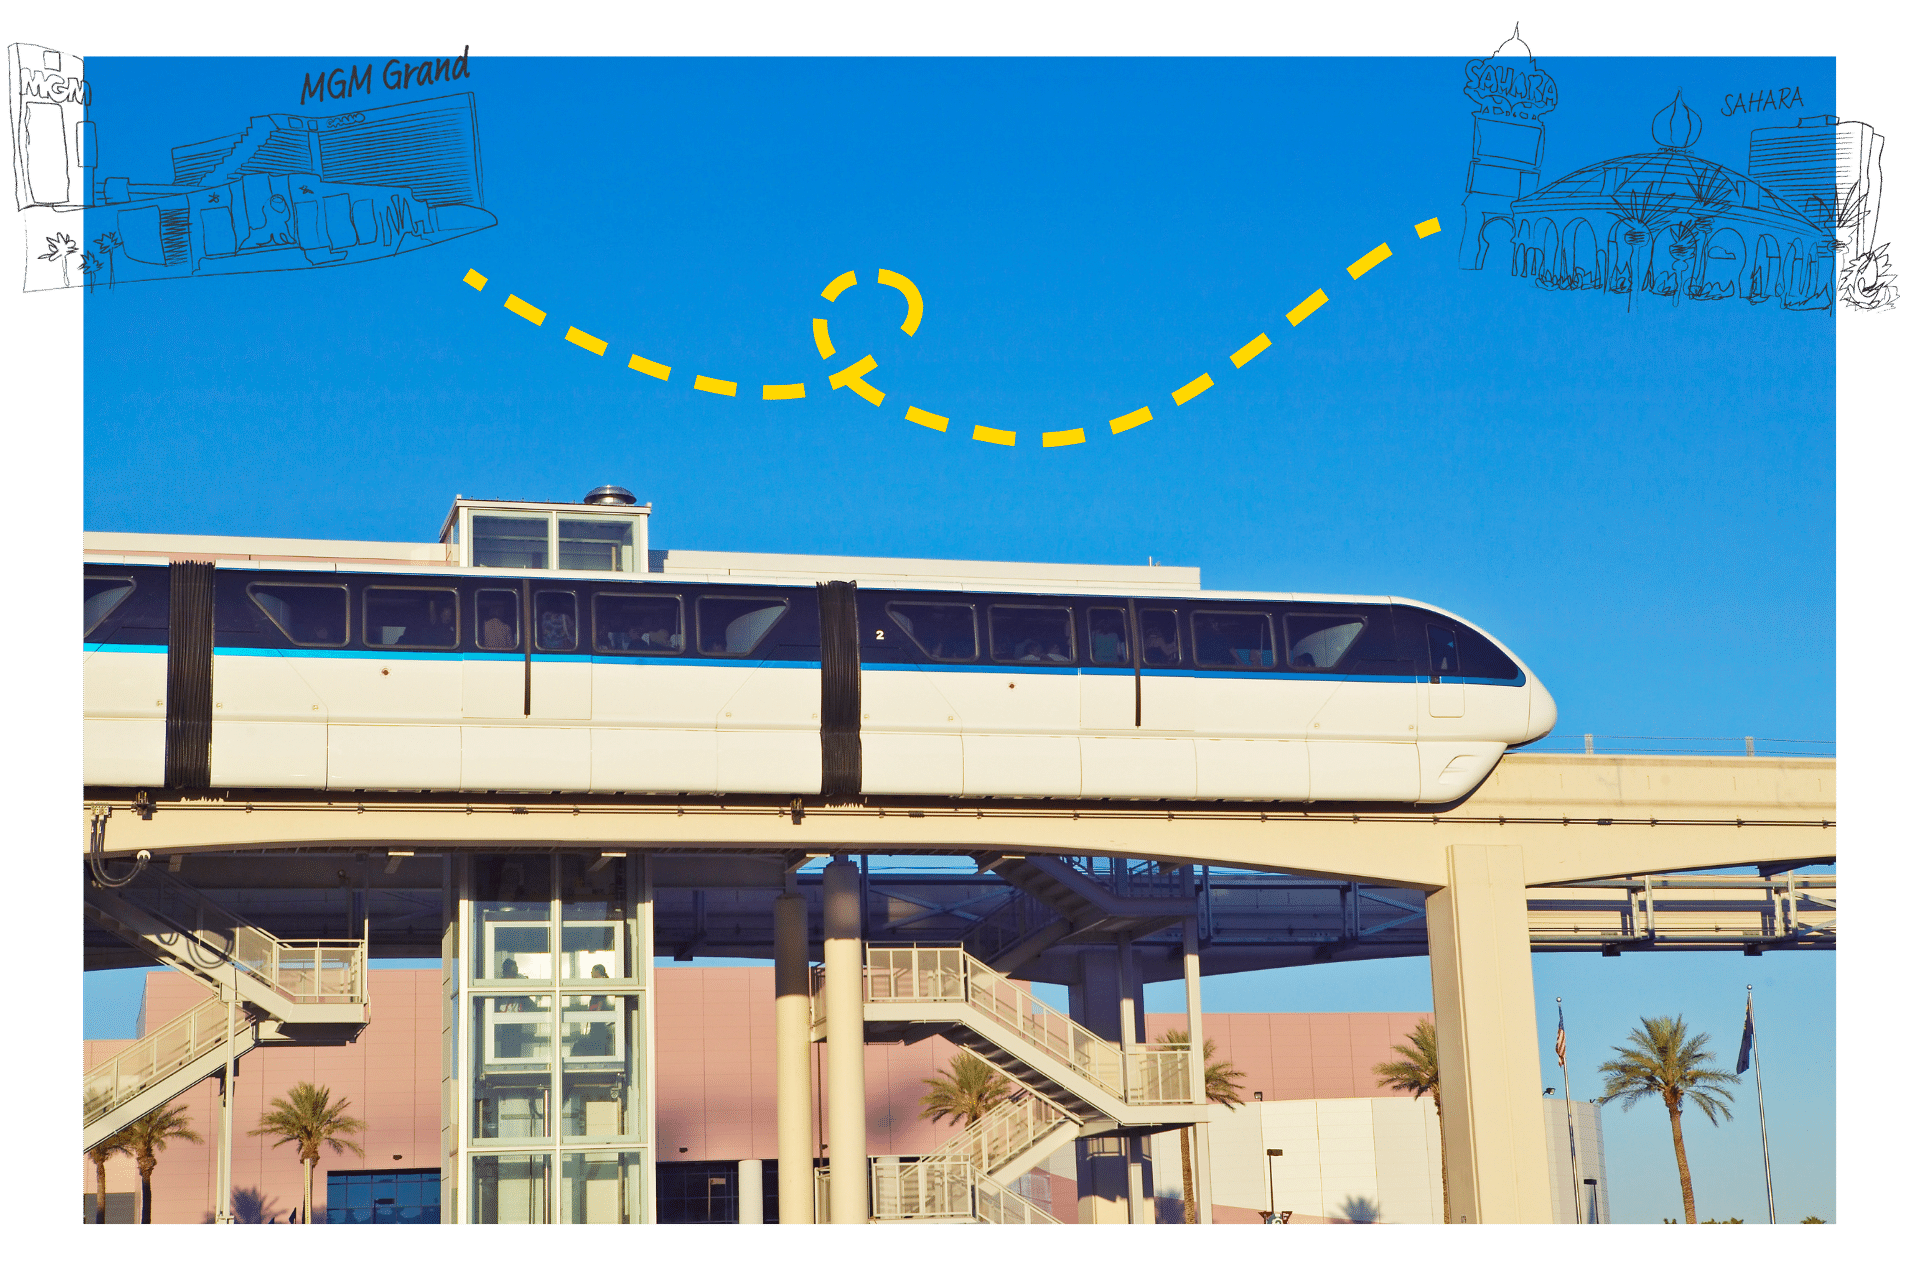 An image of the Las Vegas Monorail train against a blue sky - one of top tips for Las Vegas.